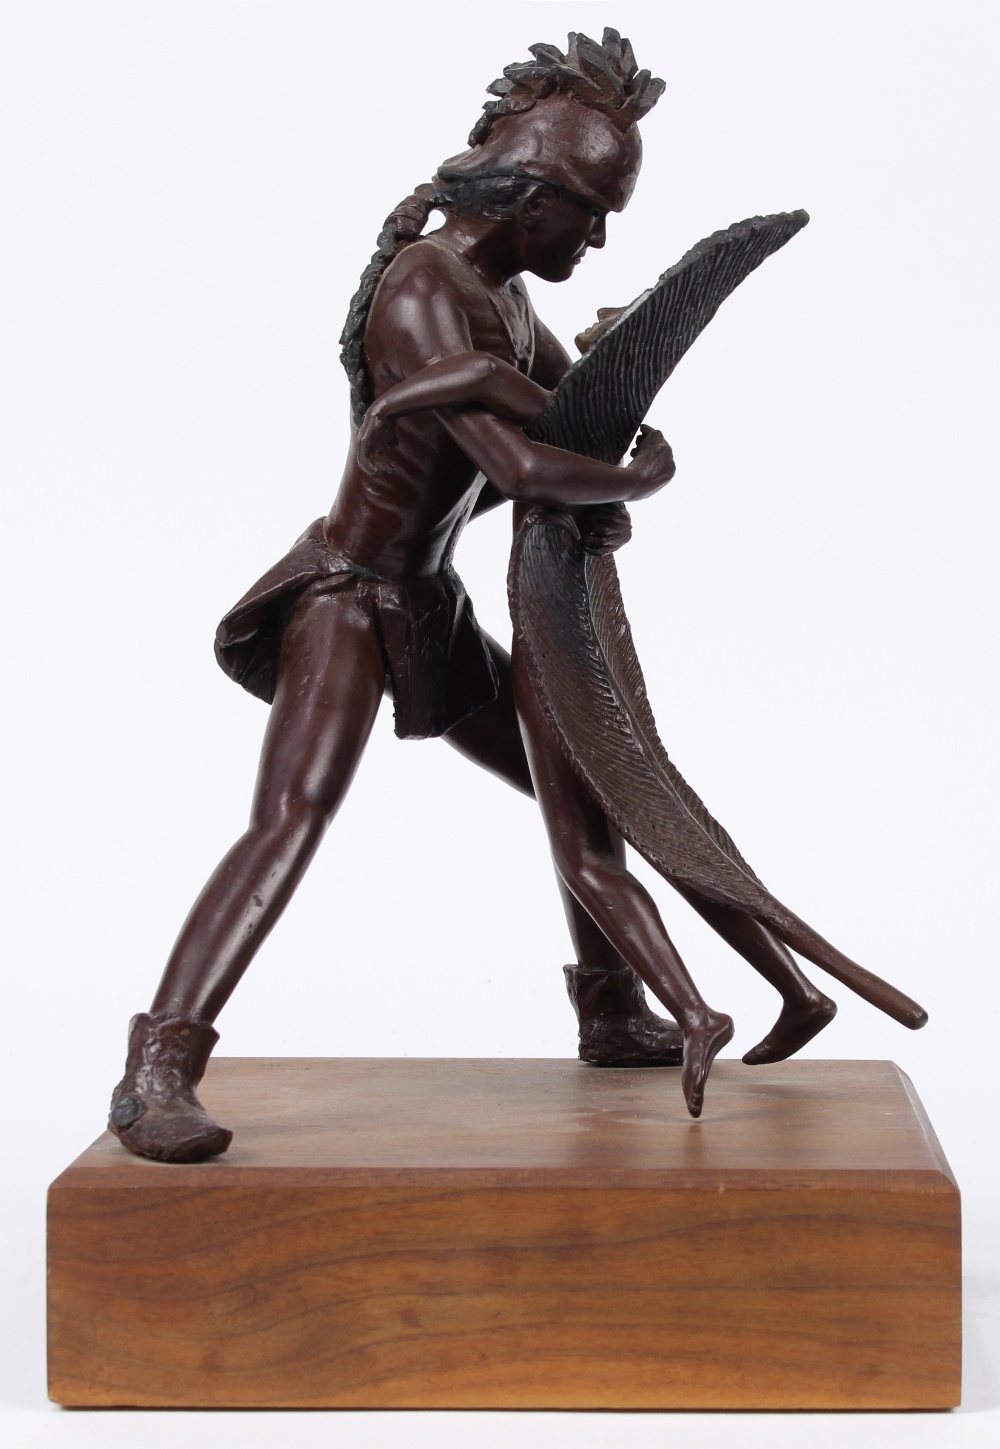 Patinated bronze Native American figure, modeled as embracing a feather girl, rising on a wood base, - Image 2 of 4